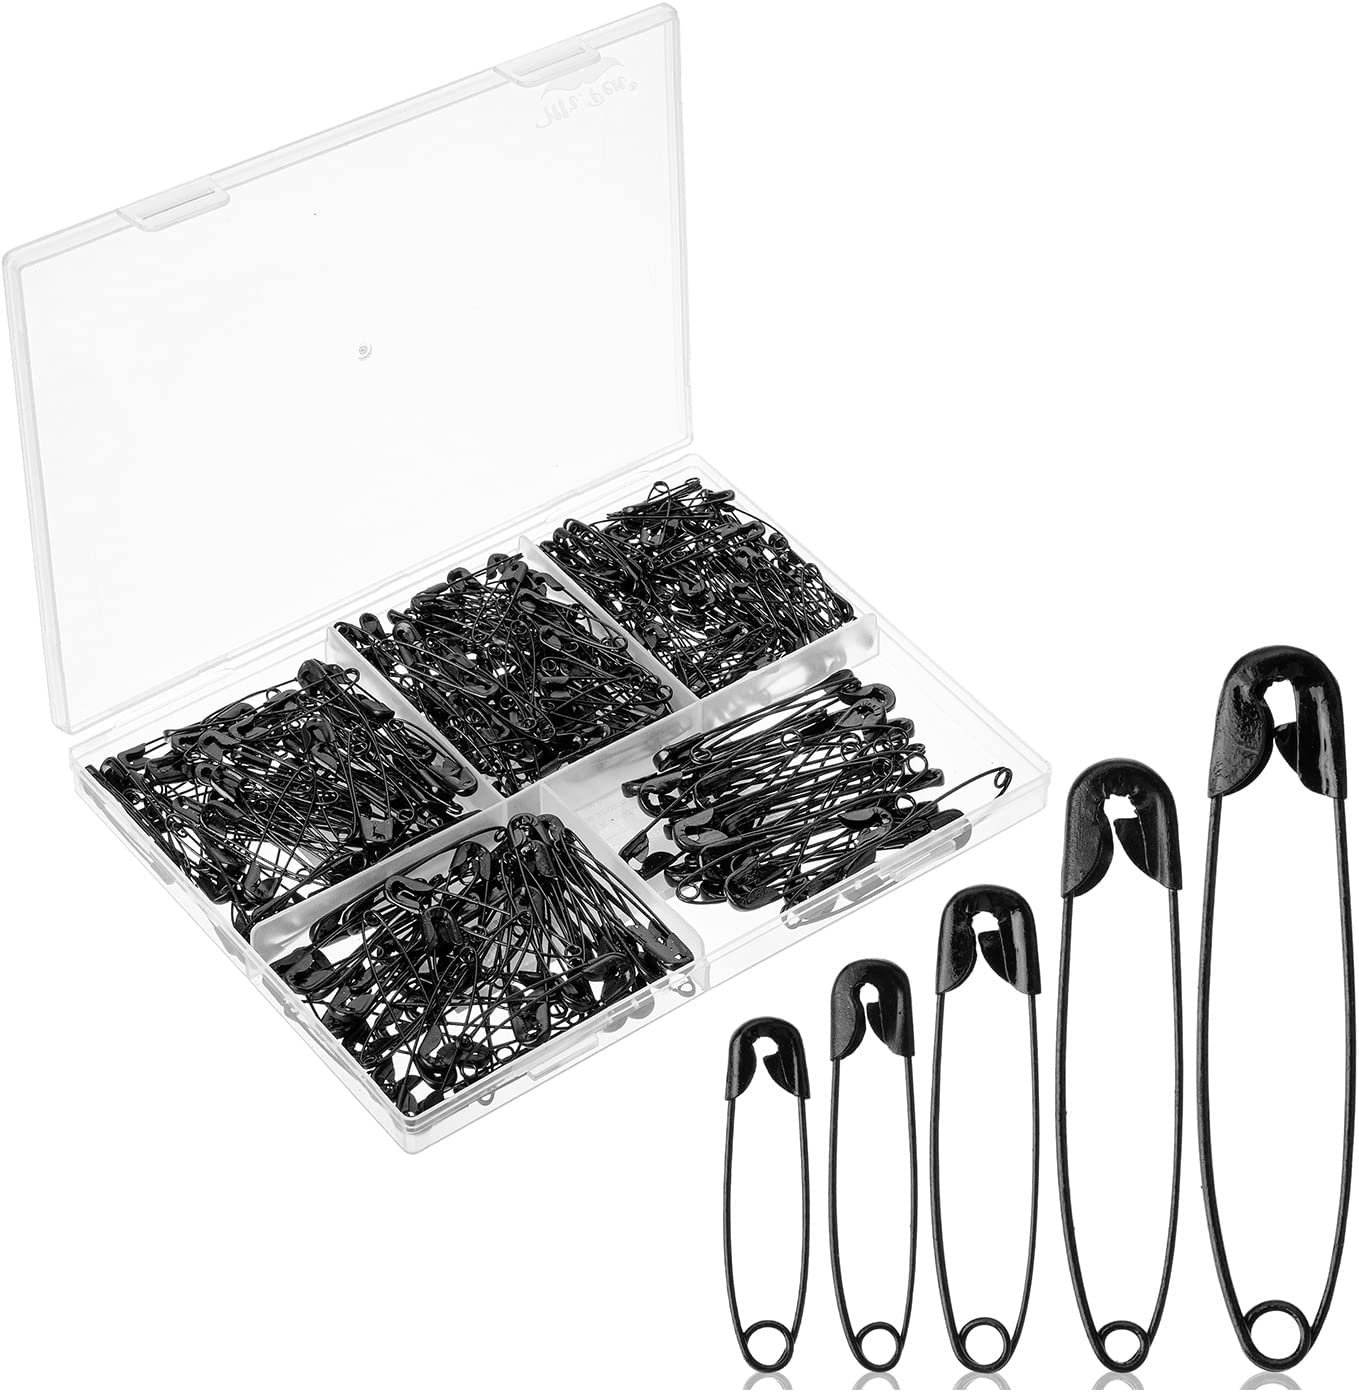 Mr. Pen- Safety Pins, Safety Pins Assorted, 400 Pack, Black, Assorted Safety  Pins, Safety Pin, Small Safety Pins - Mr. Pen Store